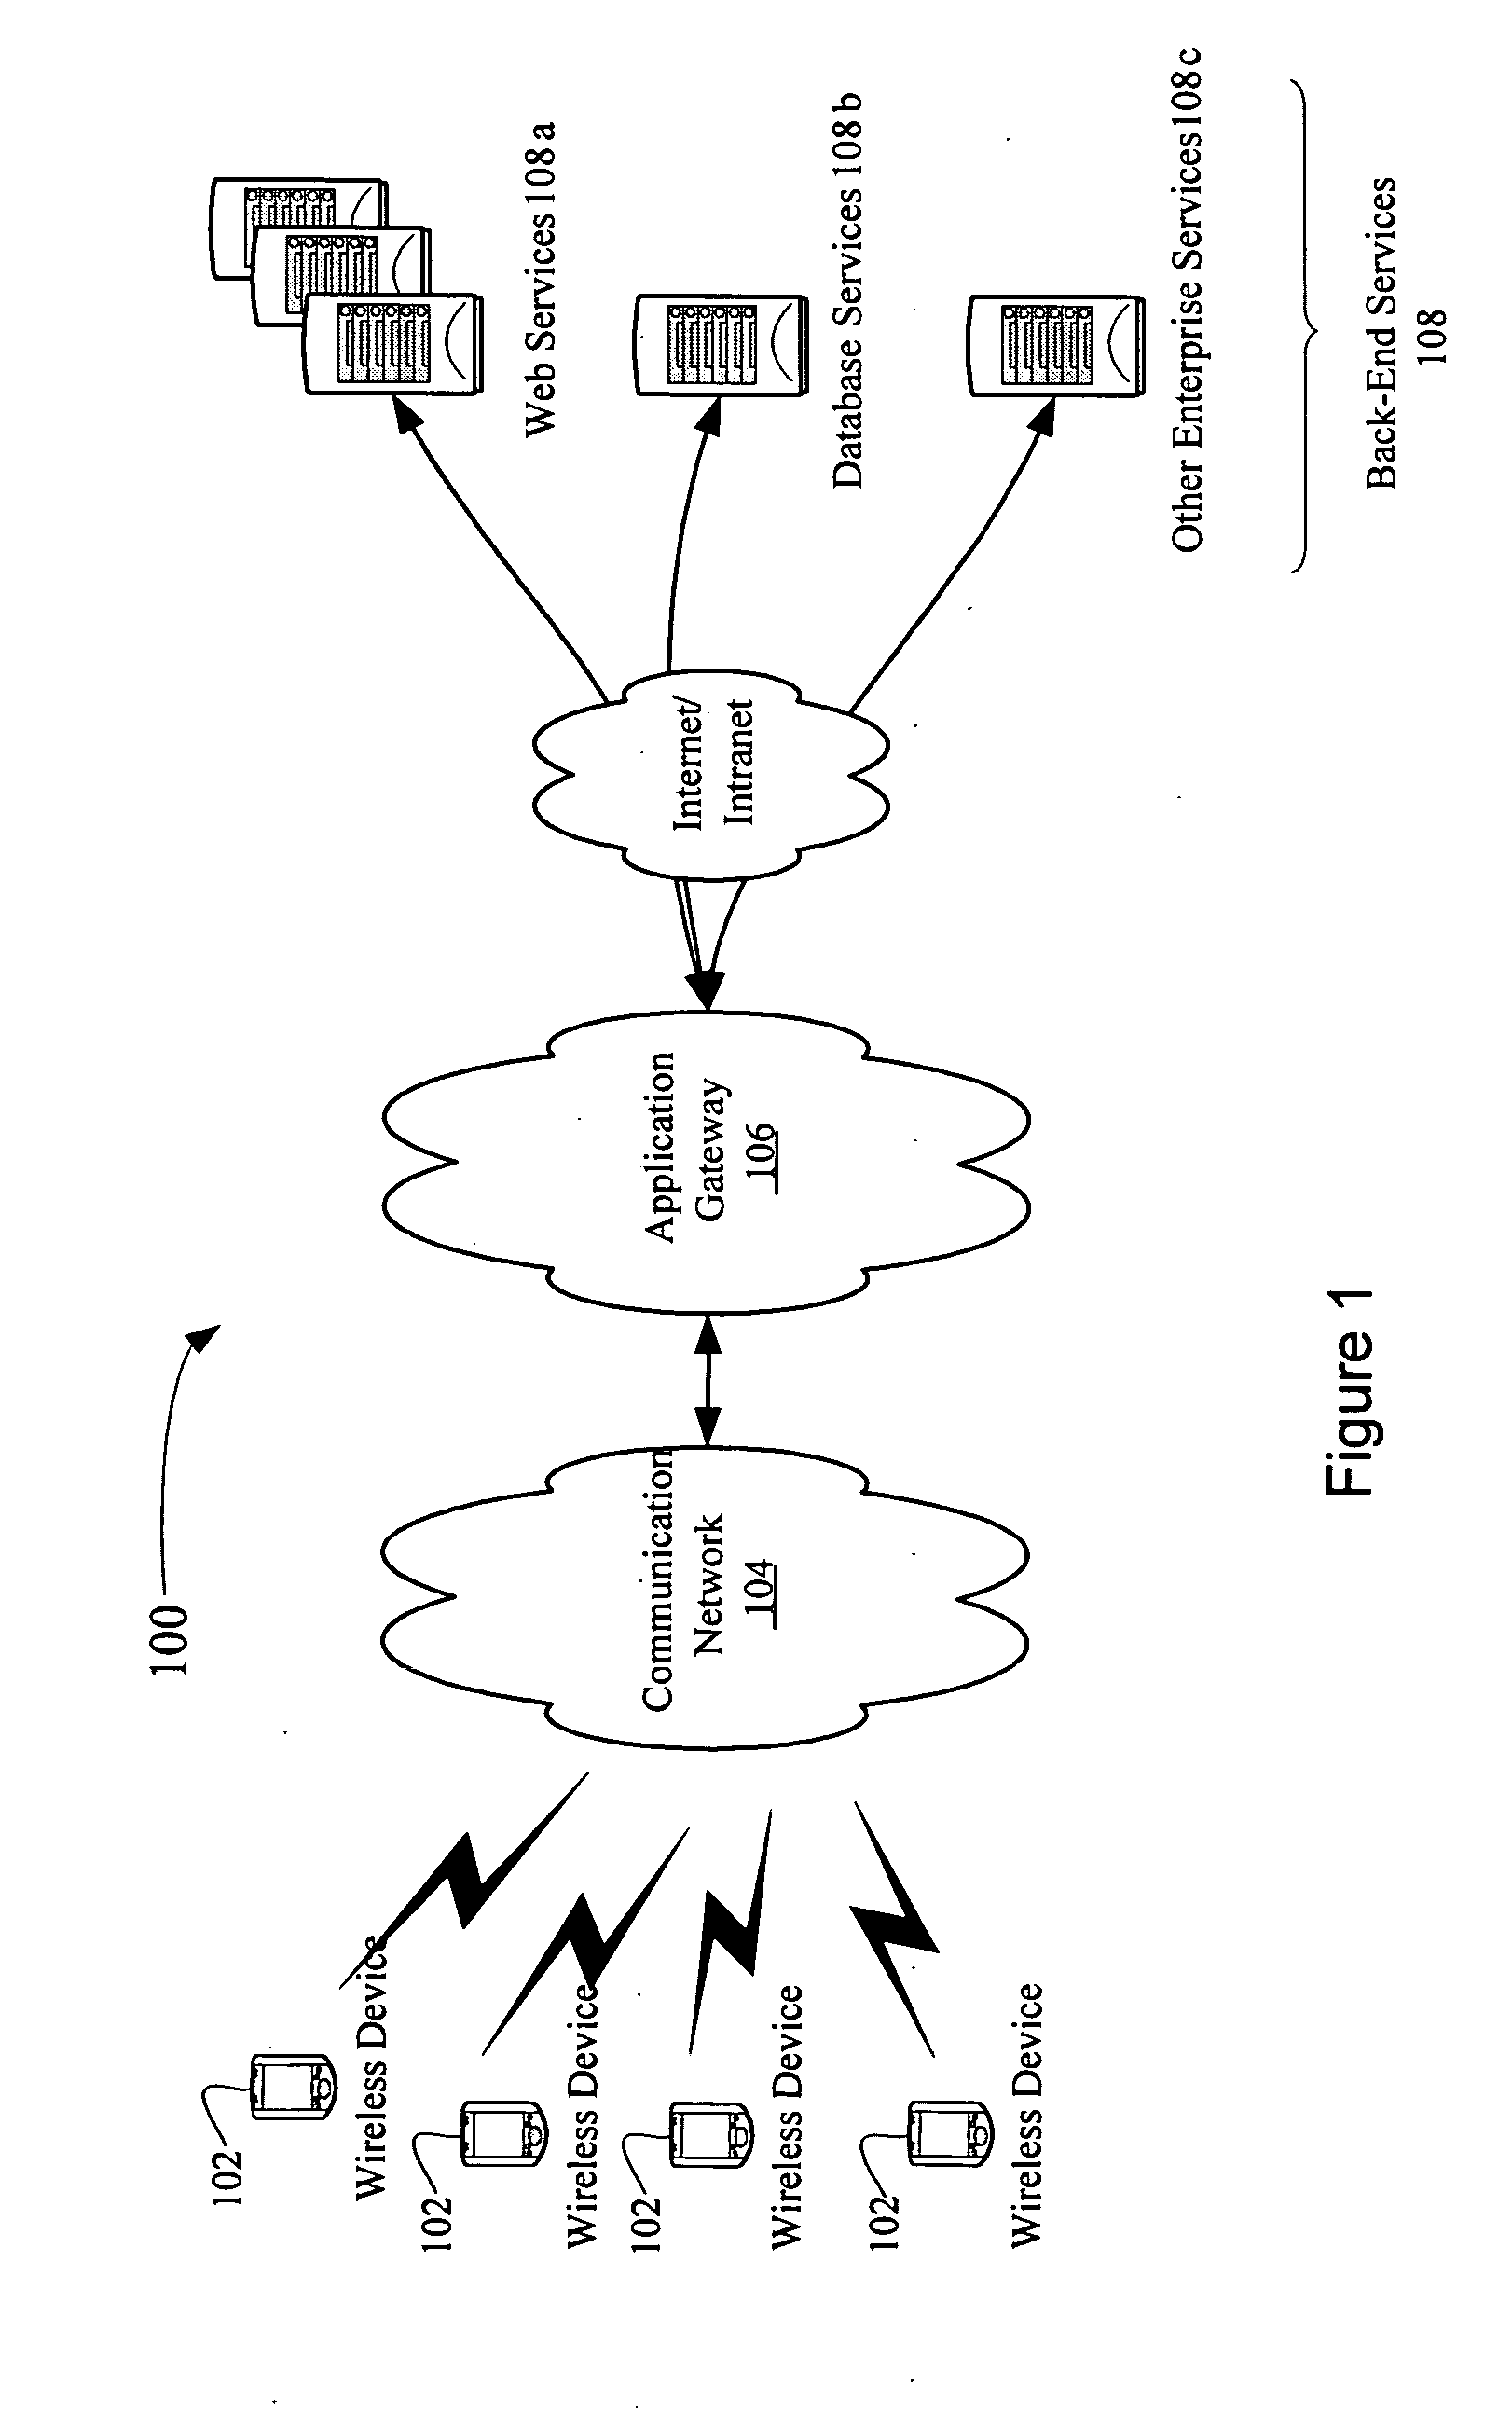 System and method of message traffic optimization